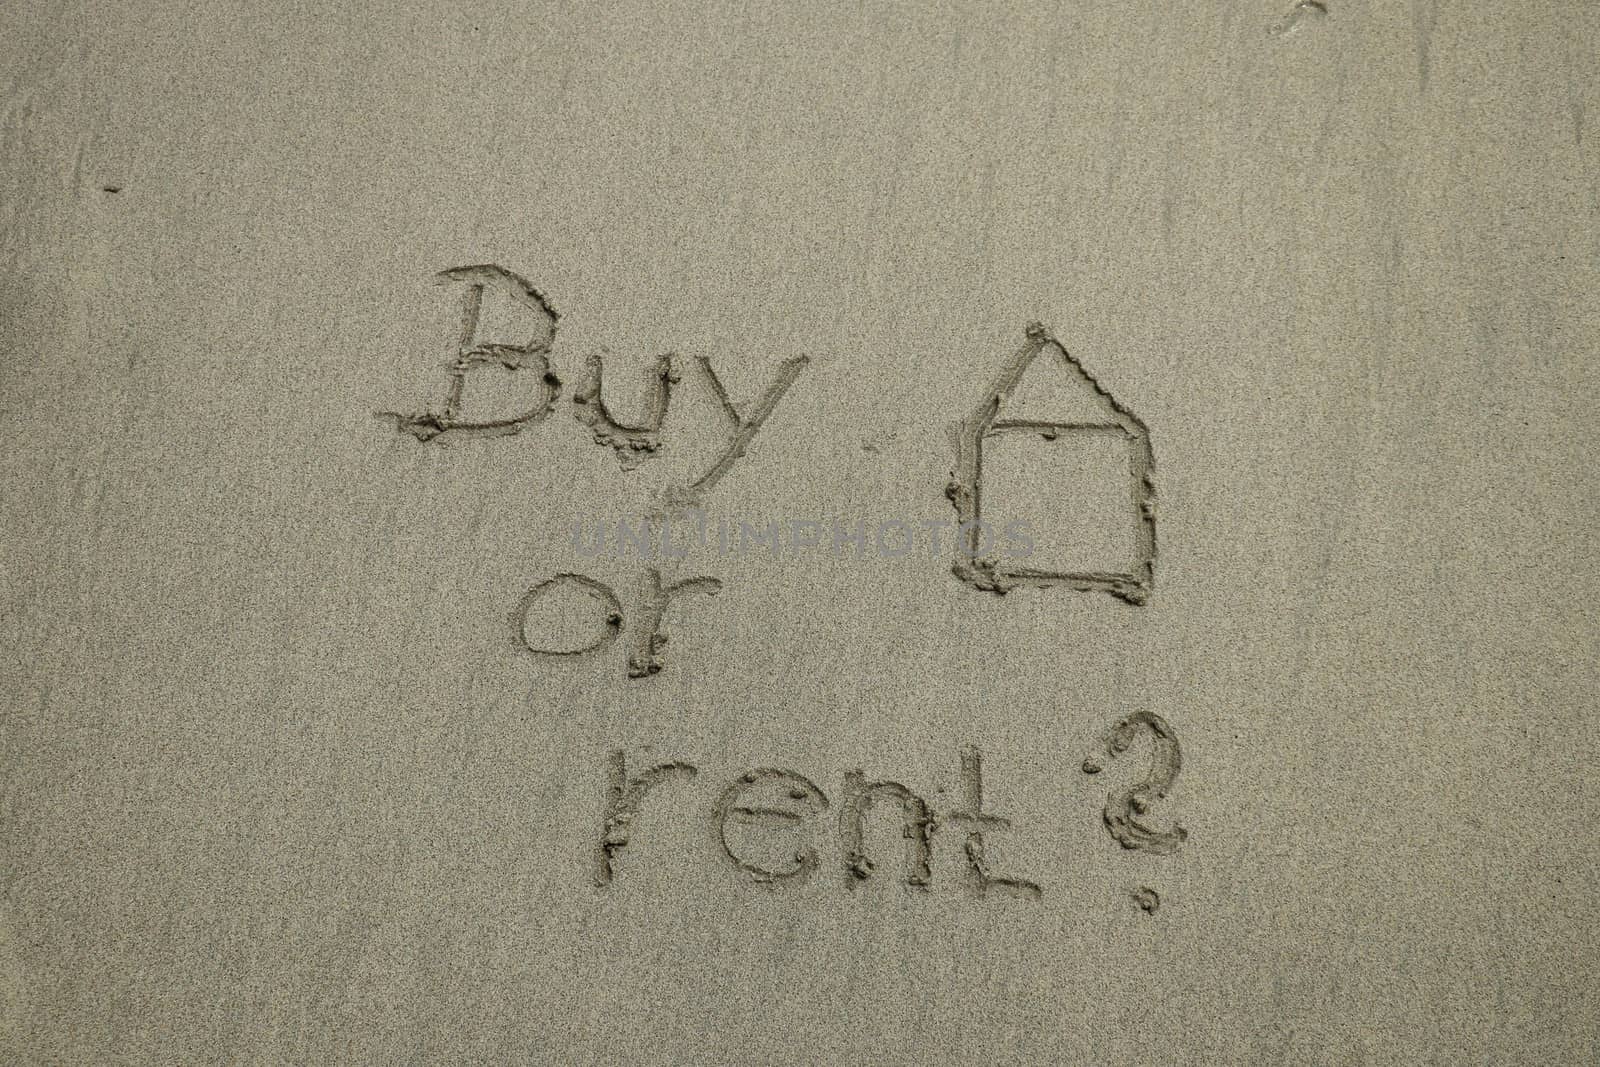 buy or rent concept, text on the sand, real estate. The sign written on sand by Sanatana2008